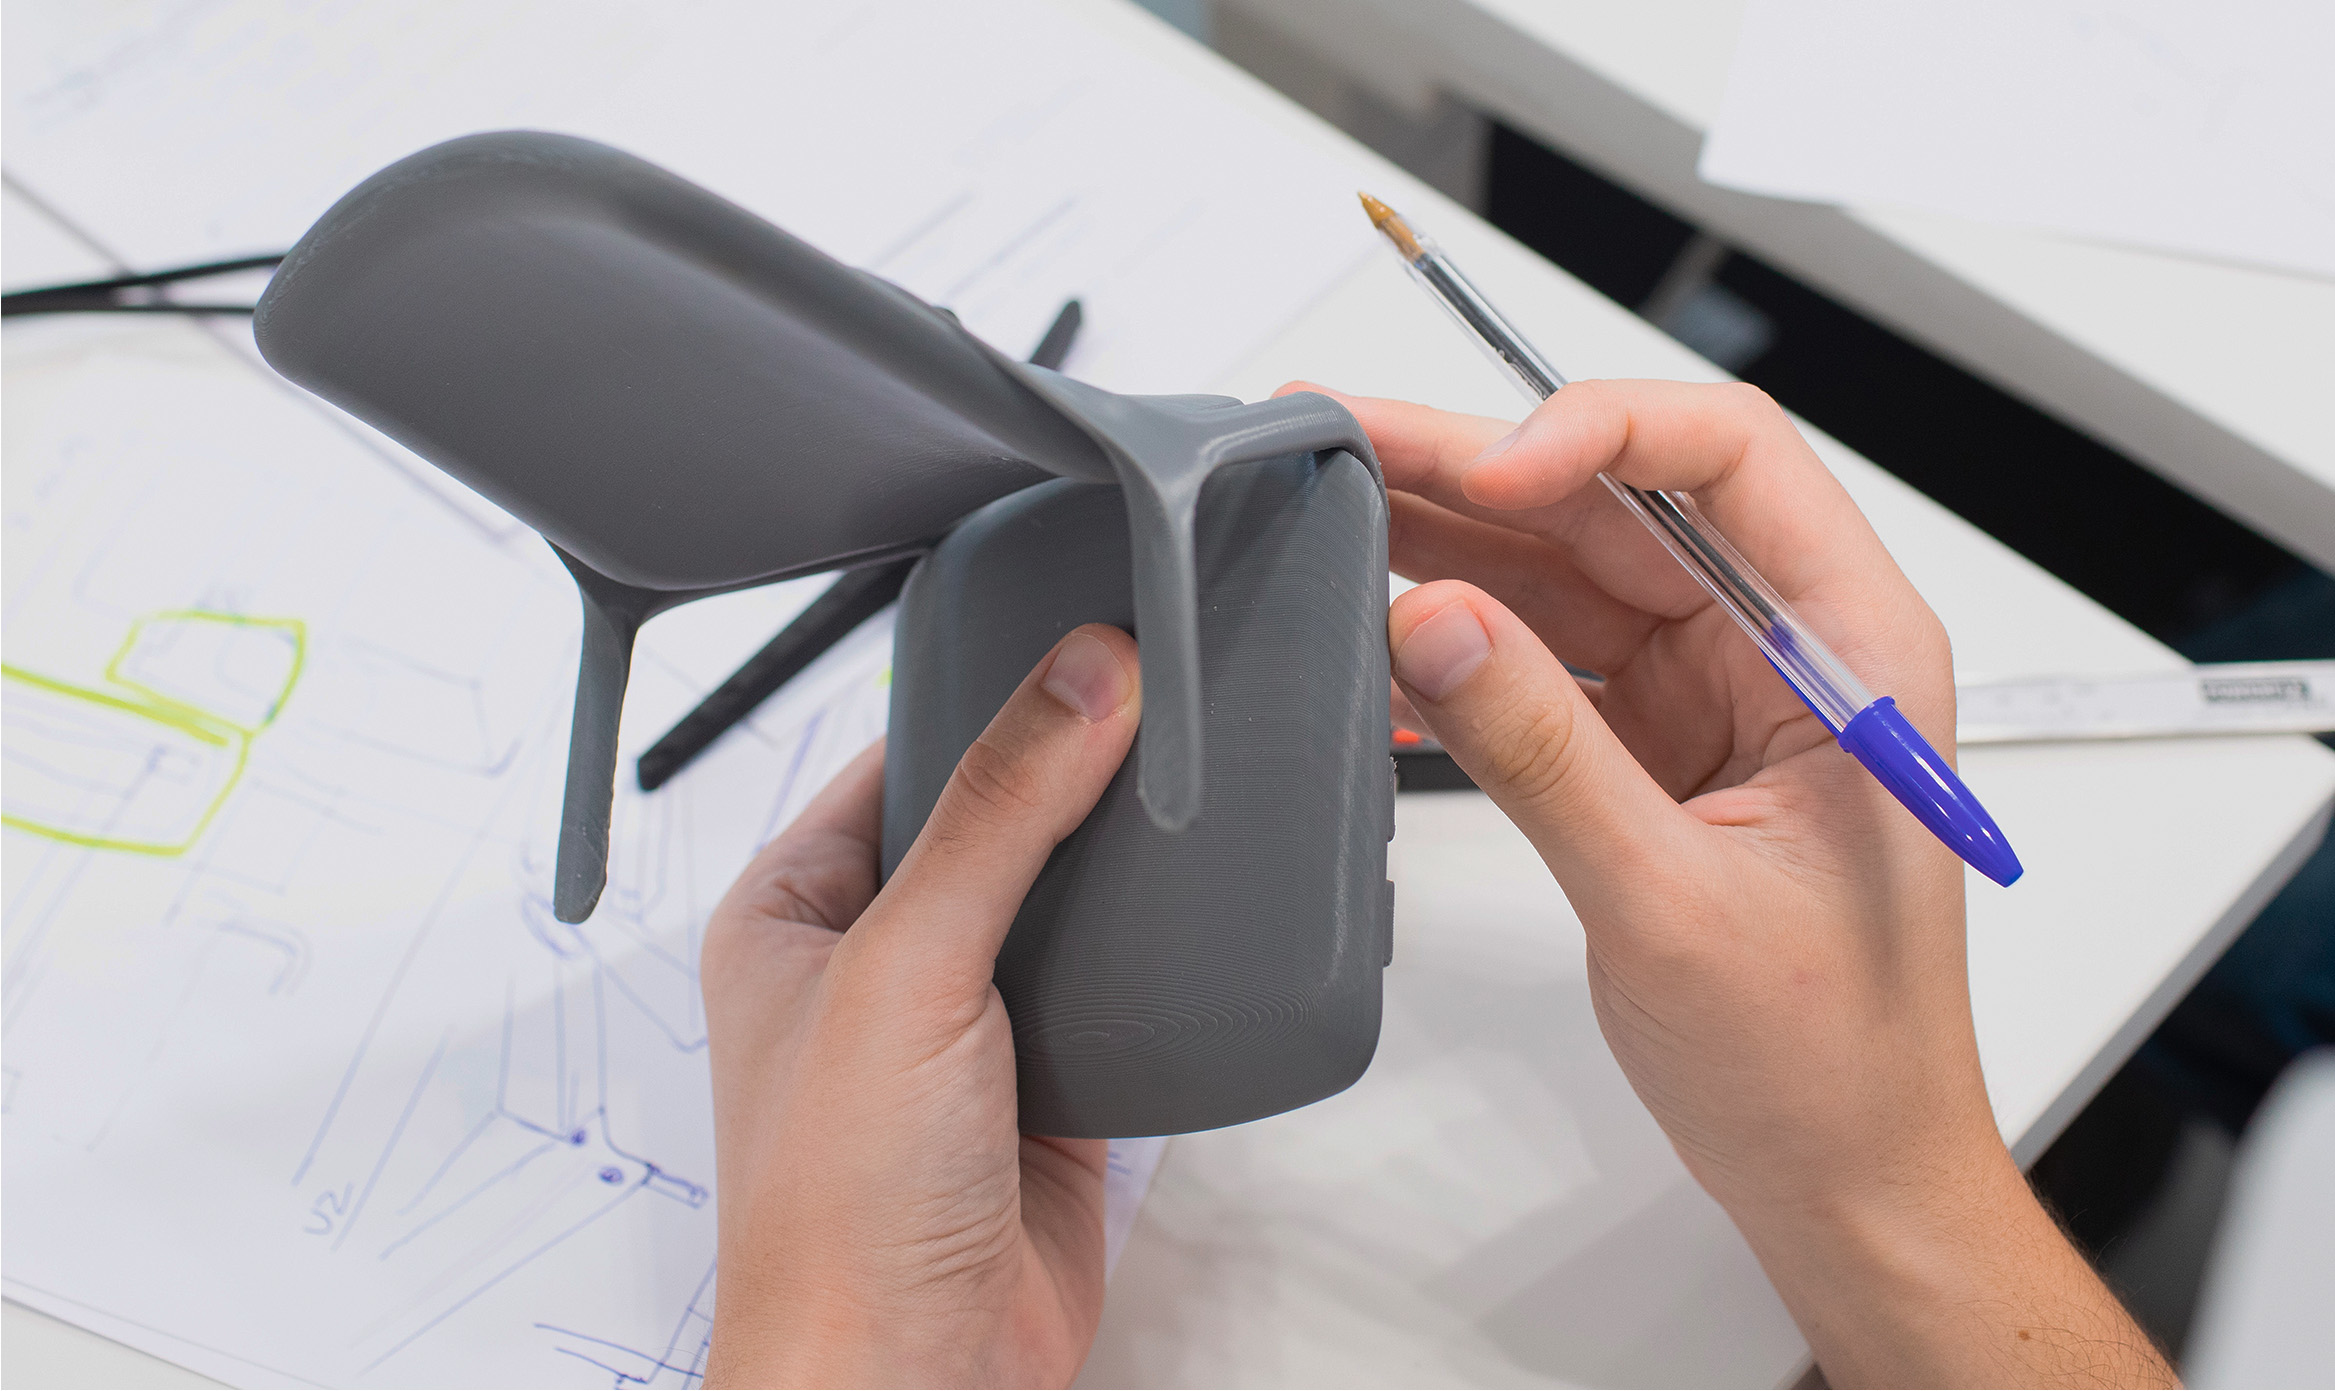 Designers at Alegre Design working on a prototype of the OFY chair for Narbutas. The image showcases the hands-on design process and expertise of Alegre Design in creating ergonomic and innovative office furniture.